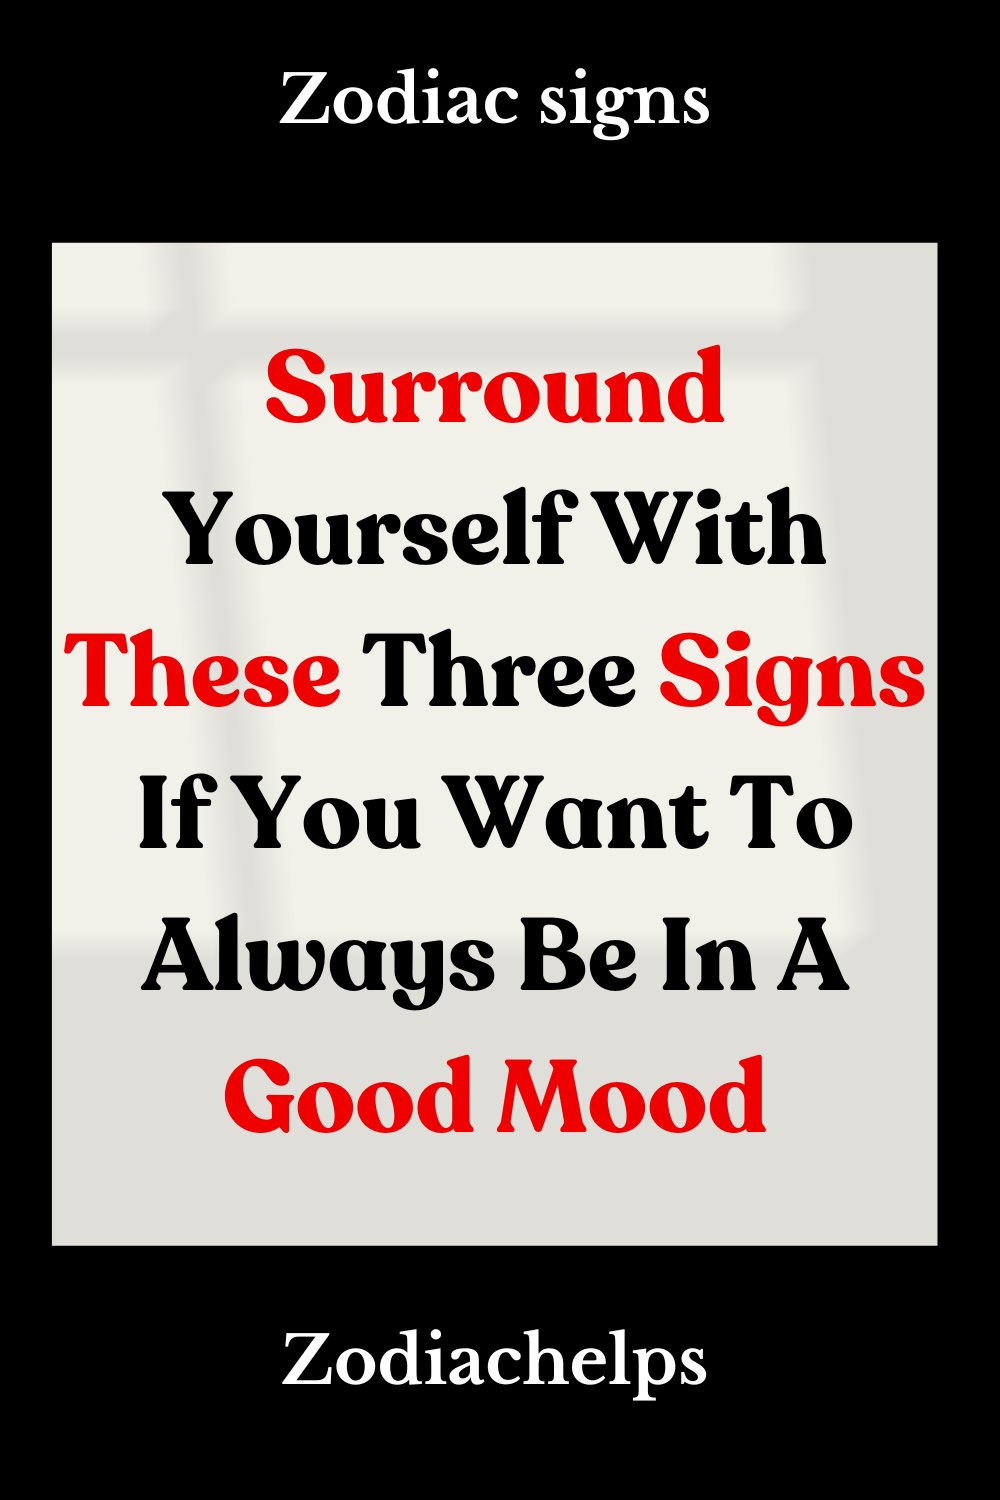 Surround Yourself With These Three Signs If You Want To Always Be In A Good Mood